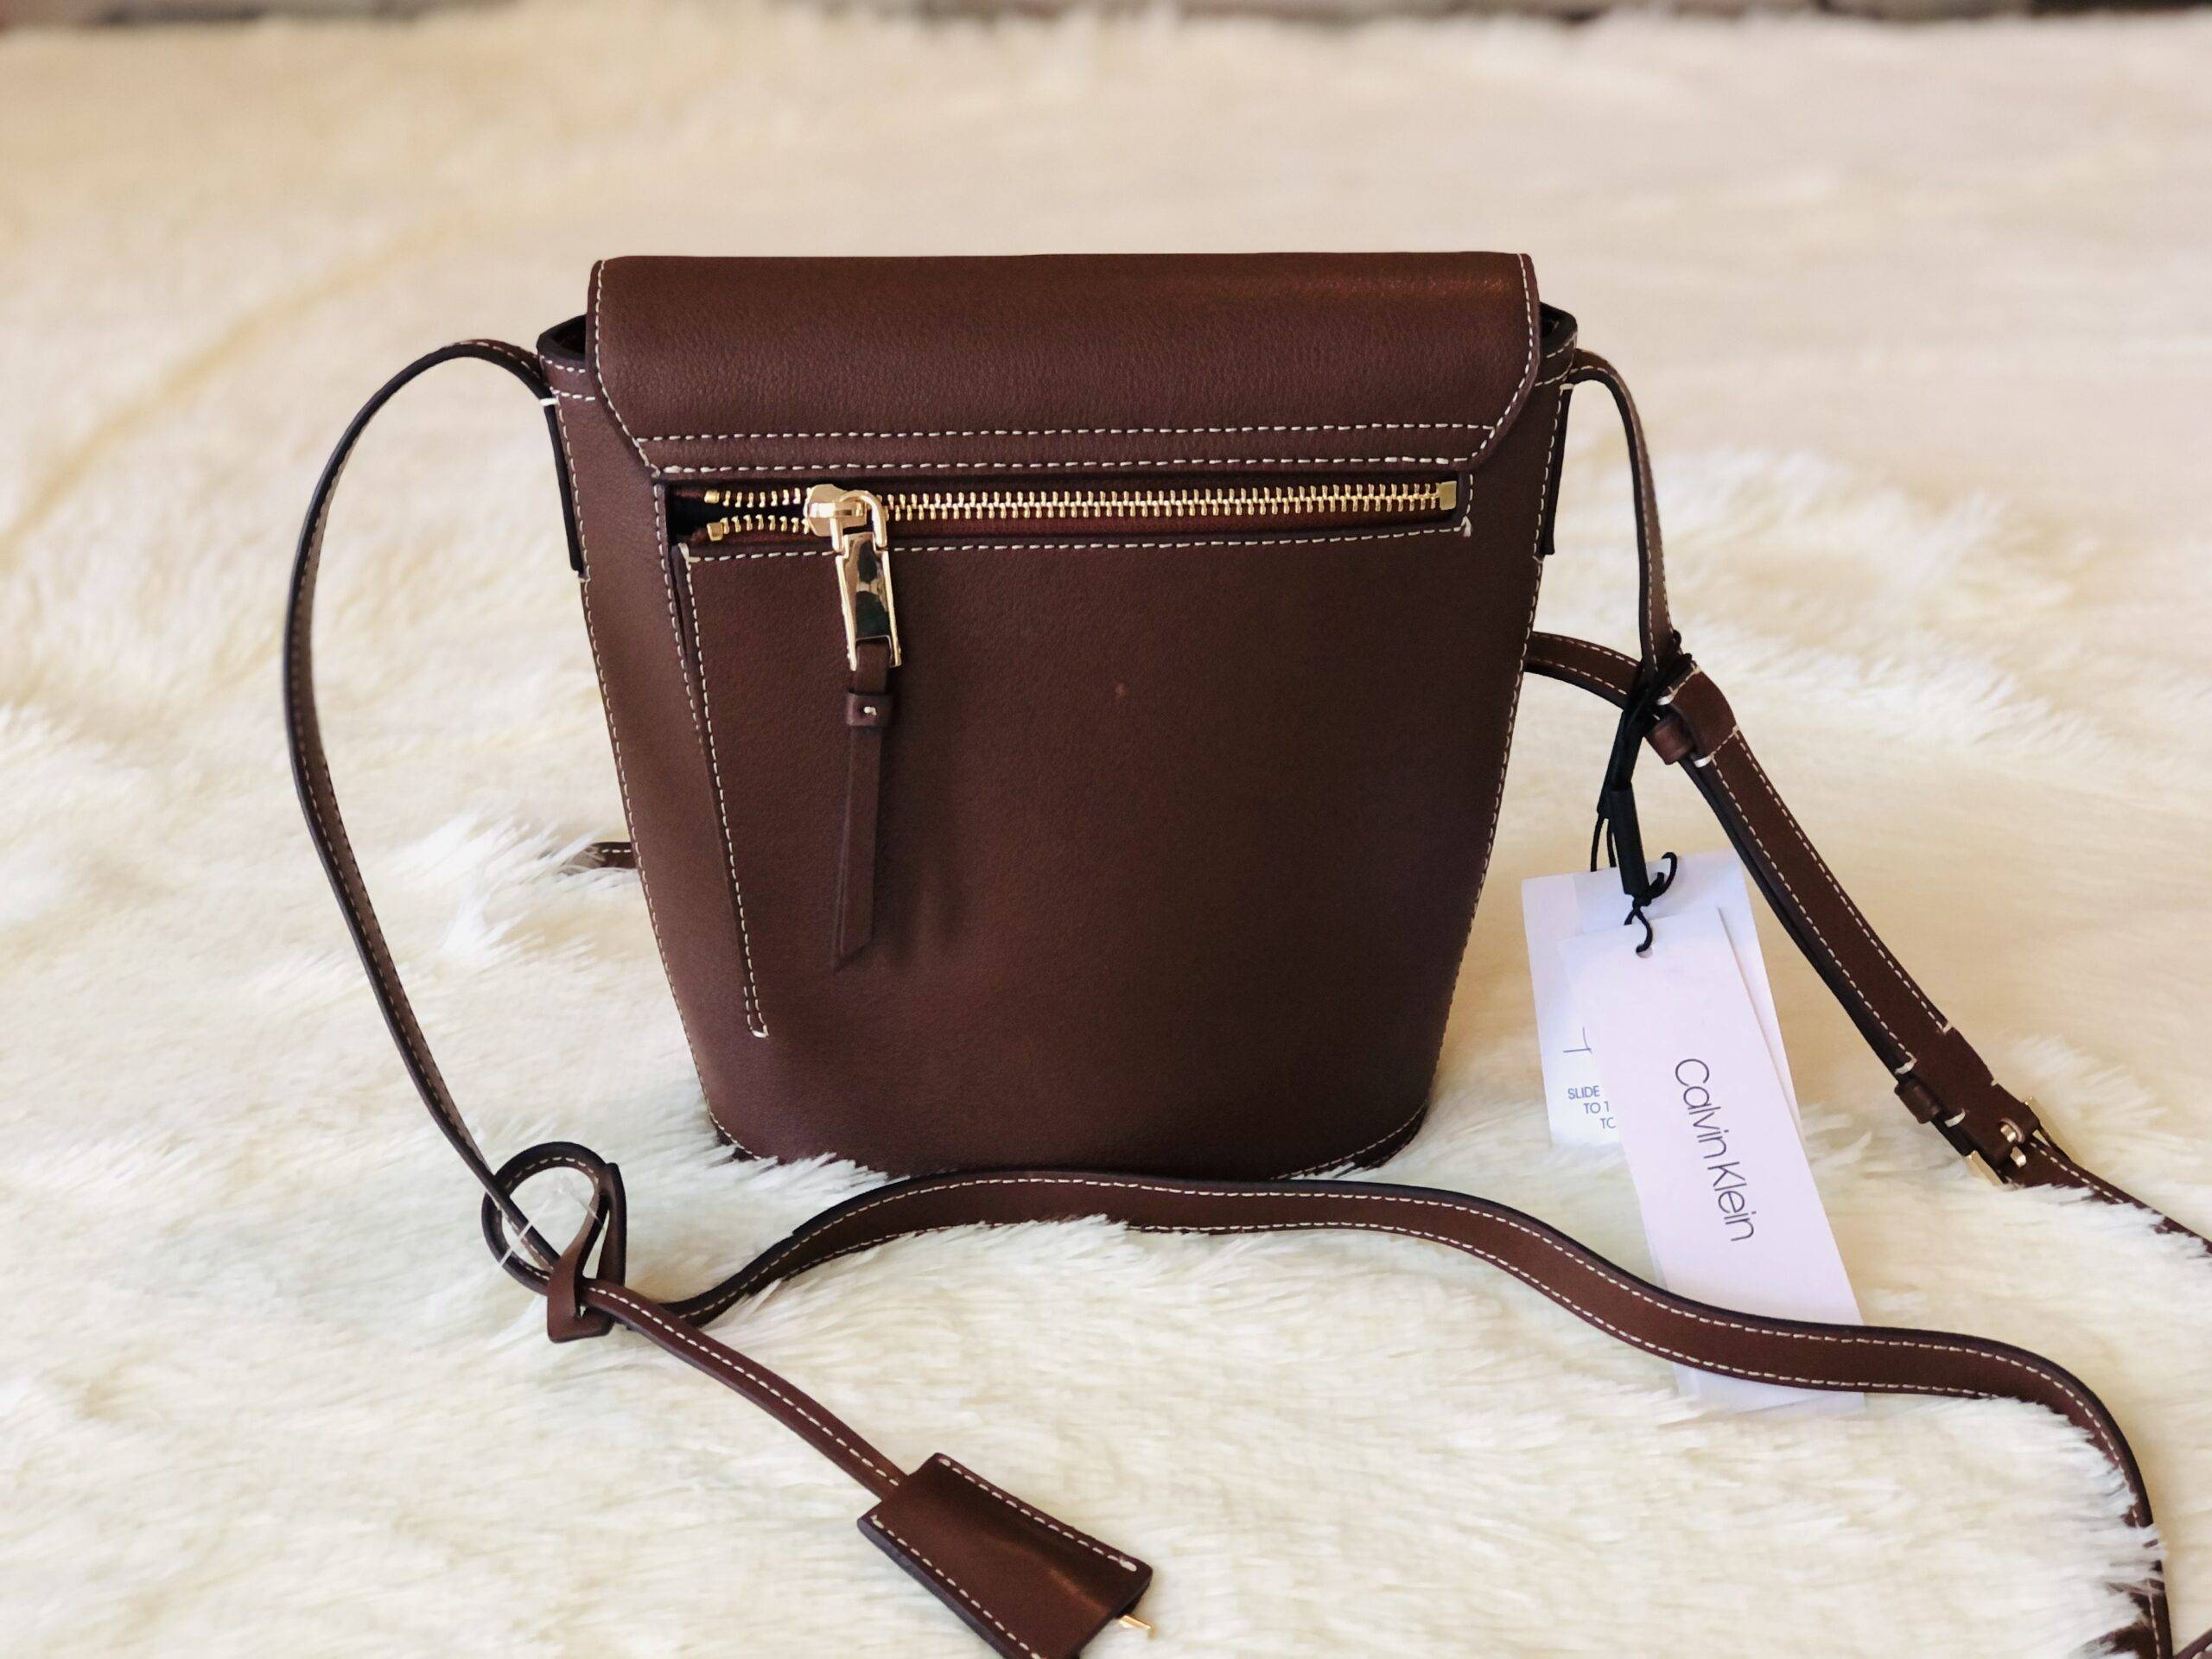 Calvin Klein subtle contrast stitching mixes with bold designer hardware bucket bag Branded Bags Bucket cb5feb1b7314637725a2e7: Black|Brown